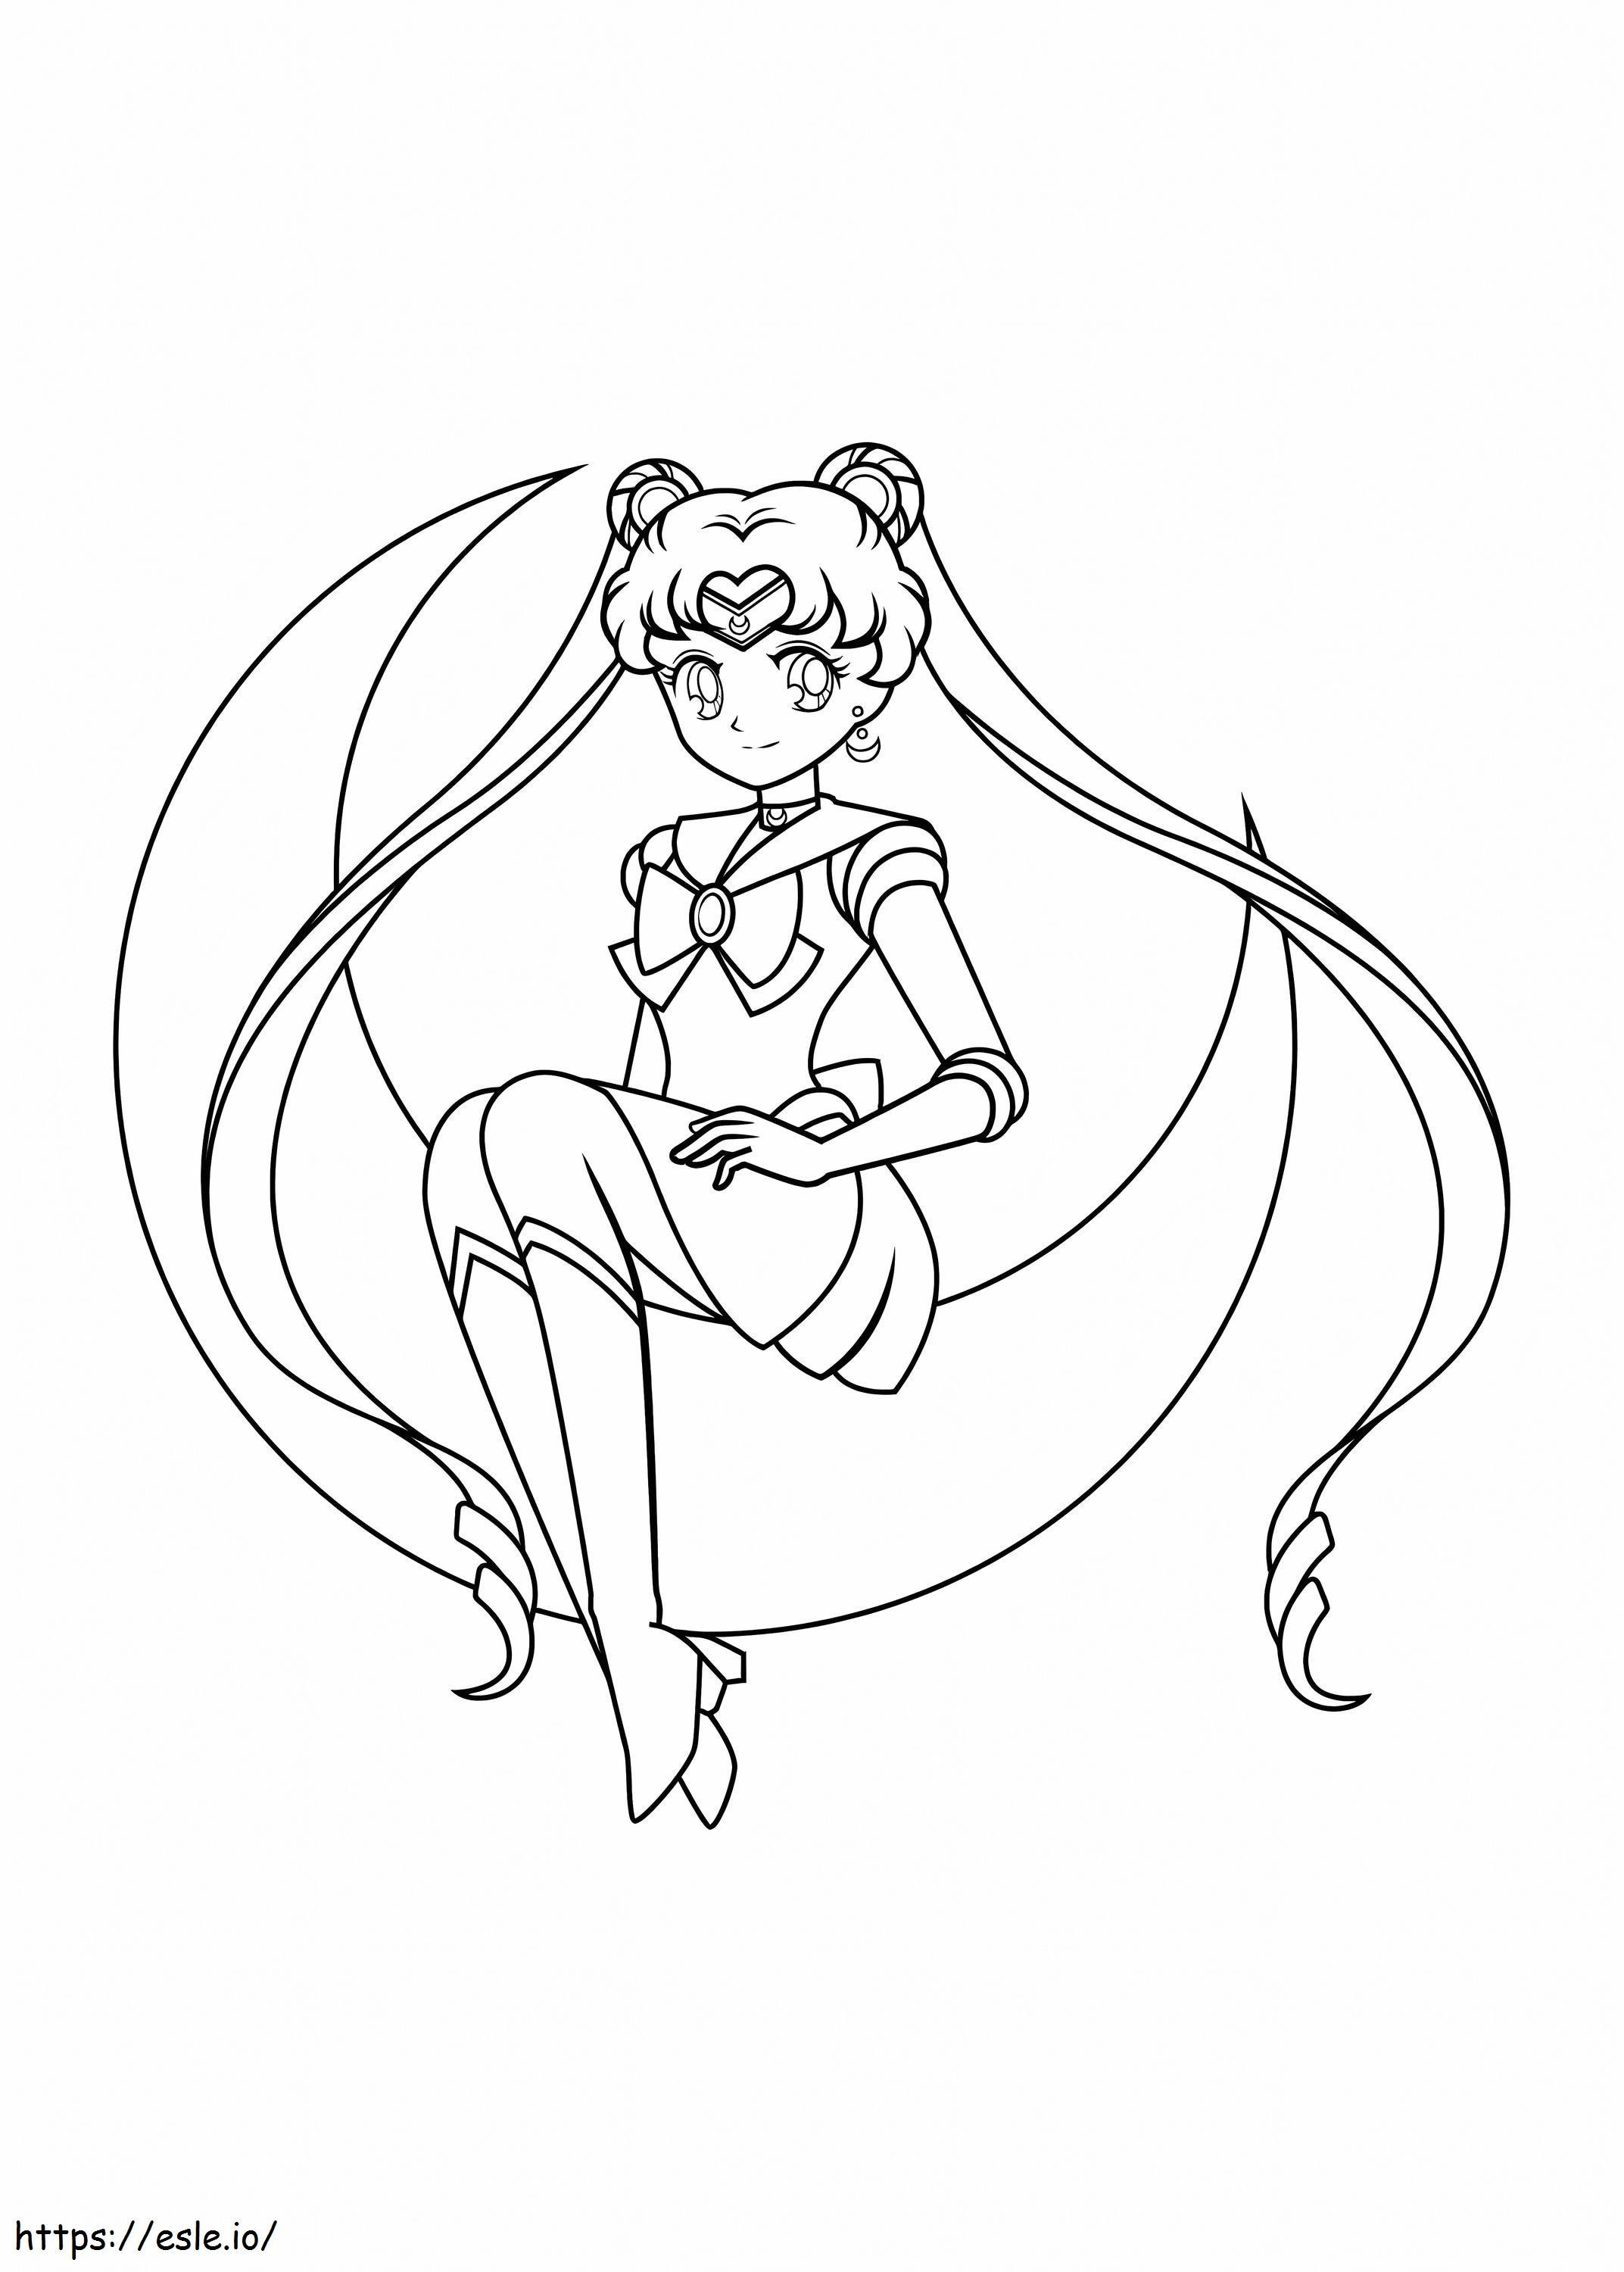 Sailor Moon Sitting On The Moon coloring page